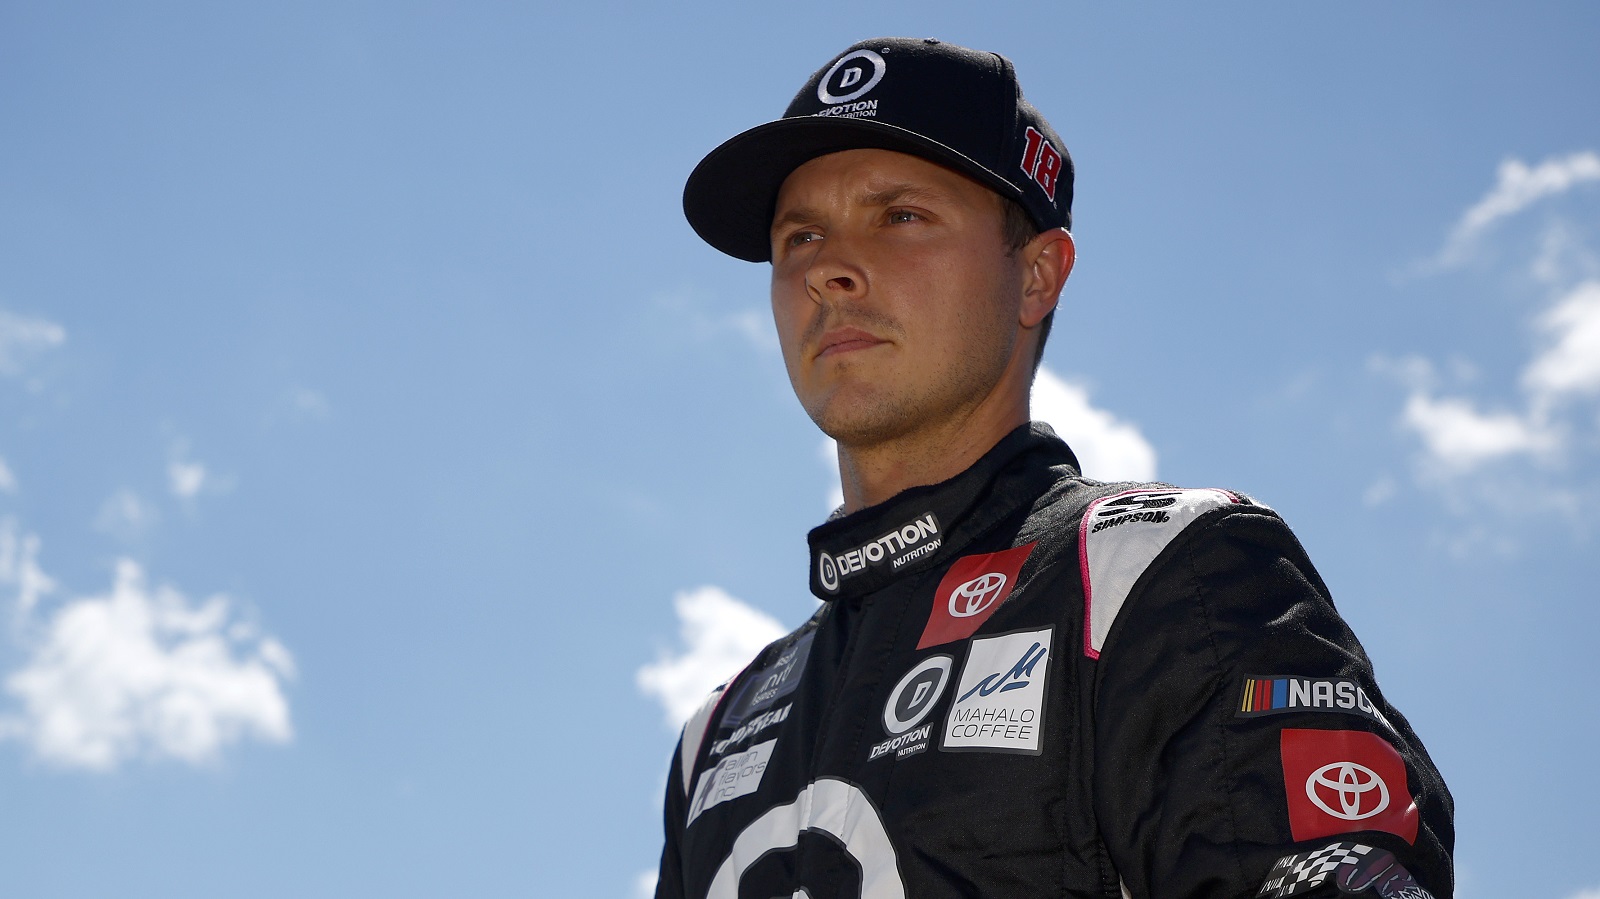 Trevor Bayne looks on during practice for the NASCAR Xfinity Series Alsco Uniforms 300 at Charlotte Motor Speedway on May 27, 2022. | Jared C. Tilton/Getty Images